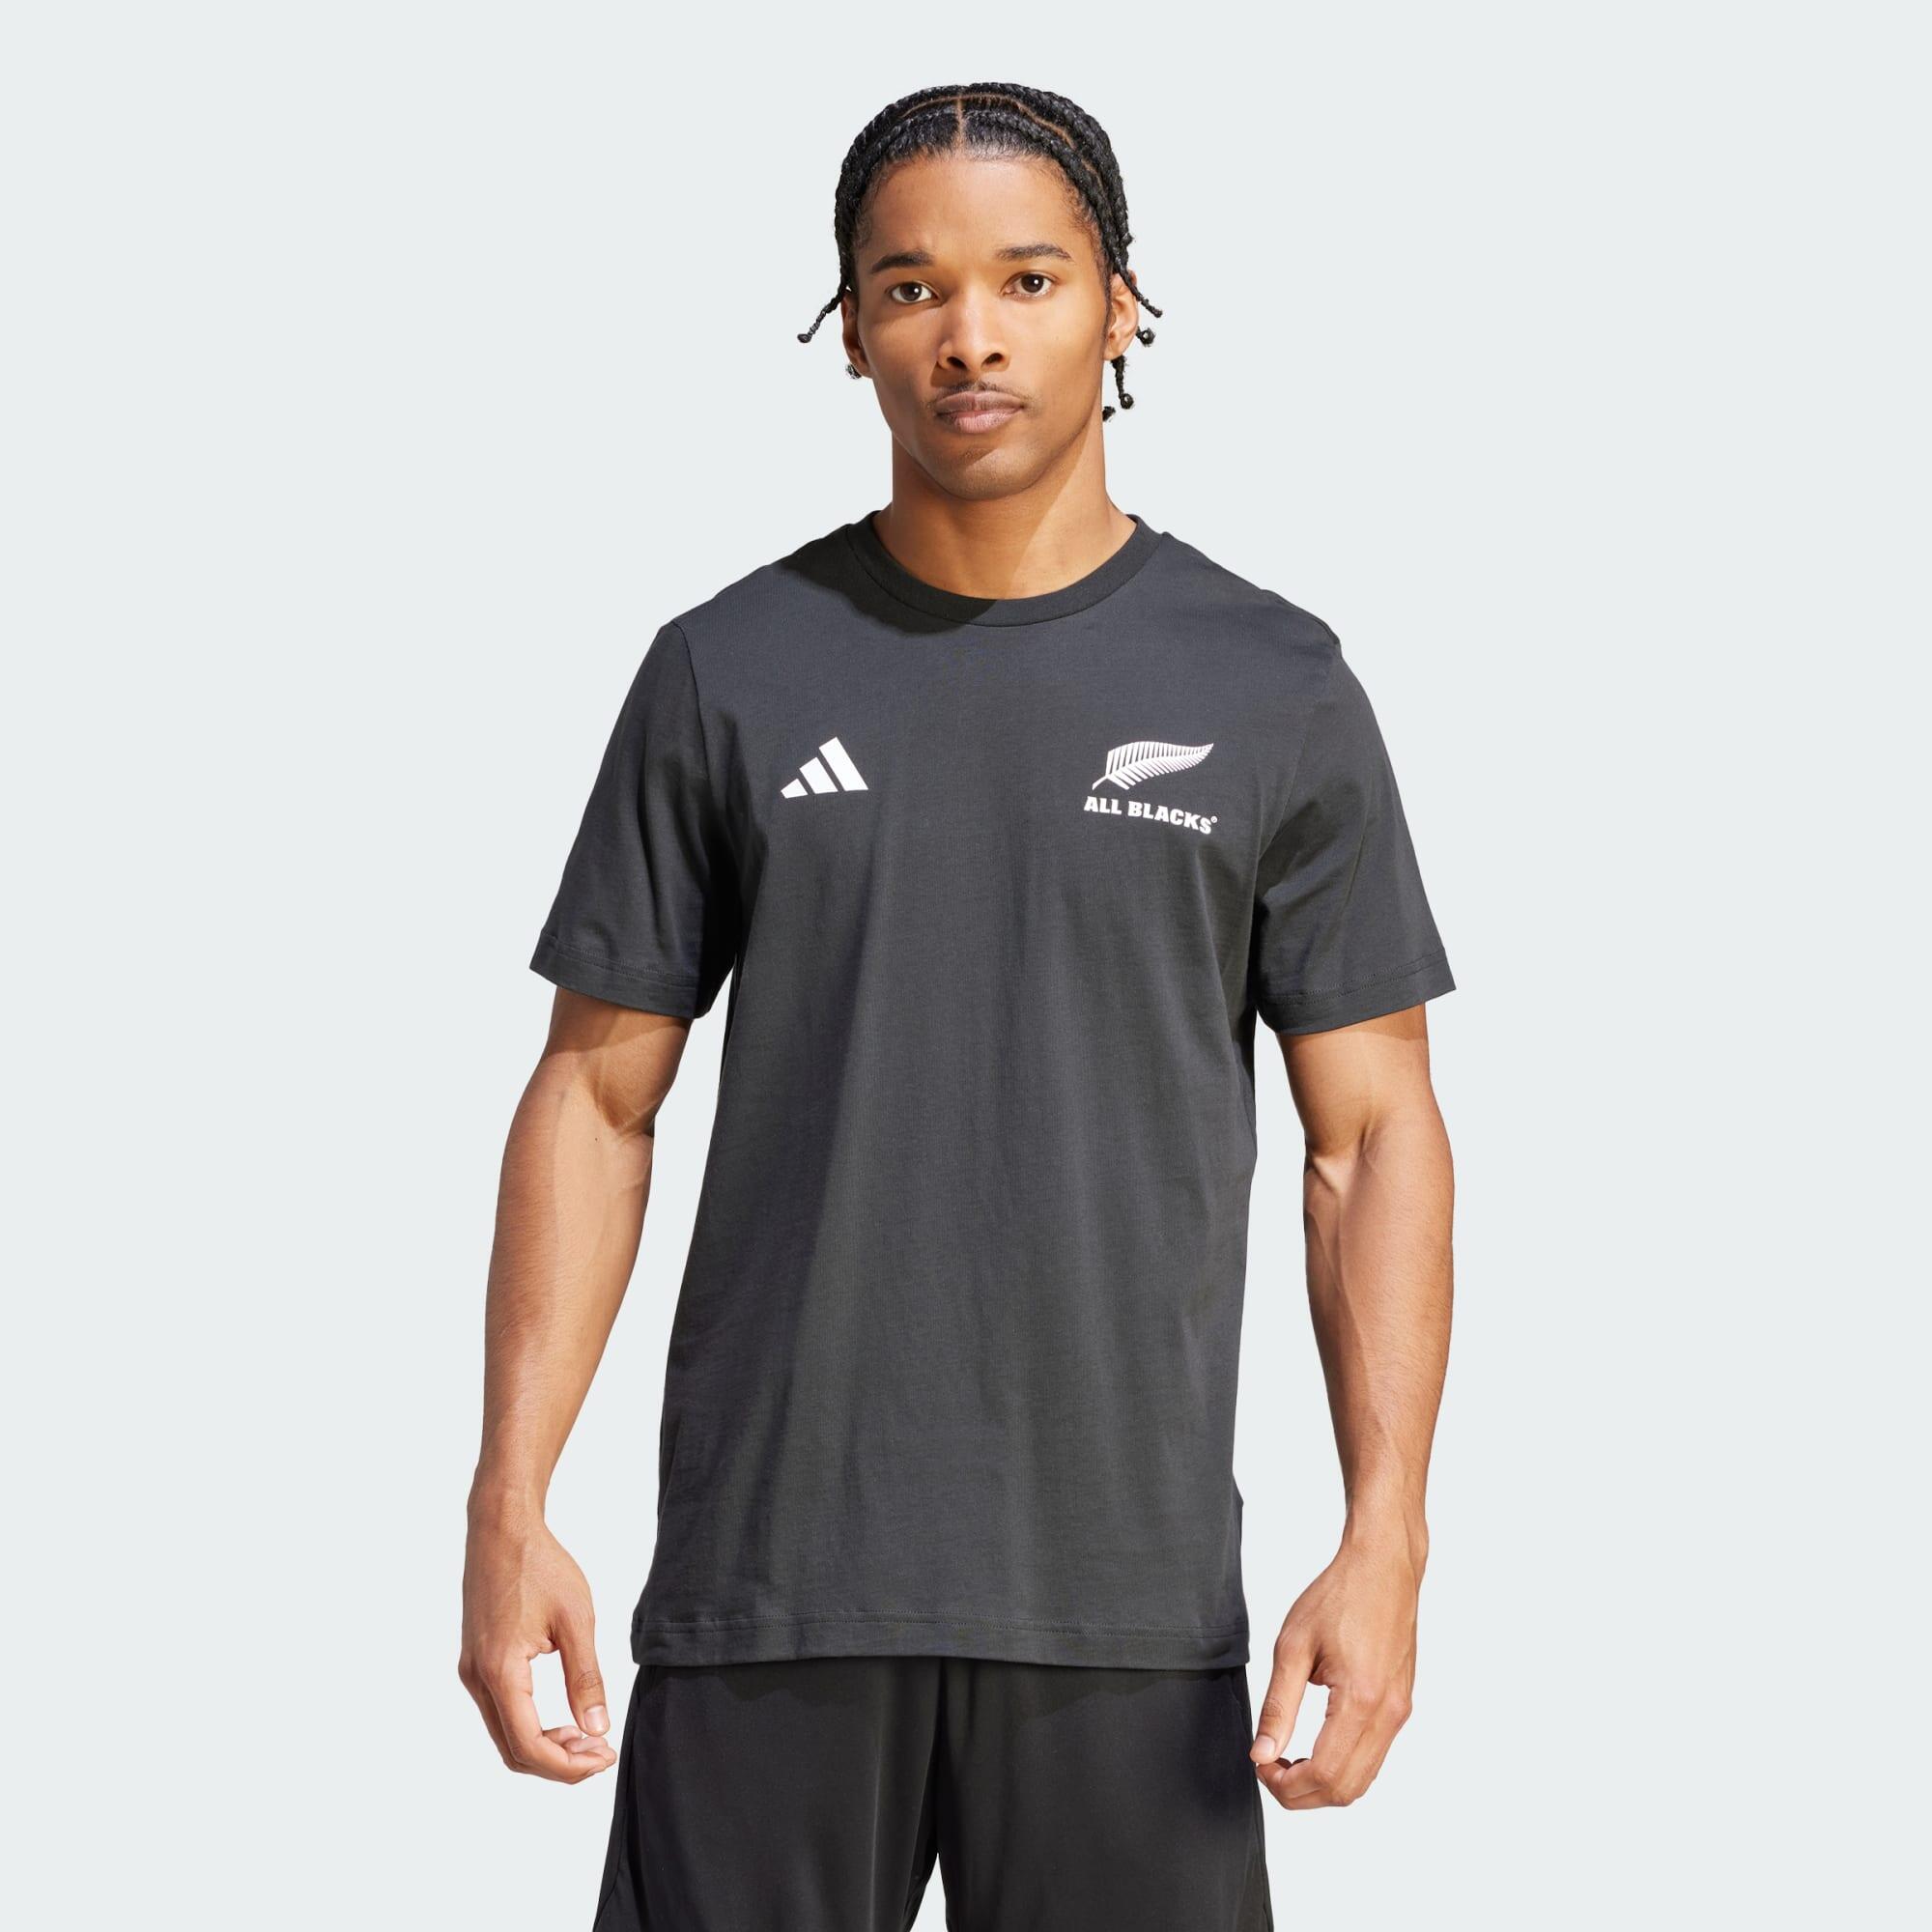 All Blacks Rugby Cotton Tee 1/7